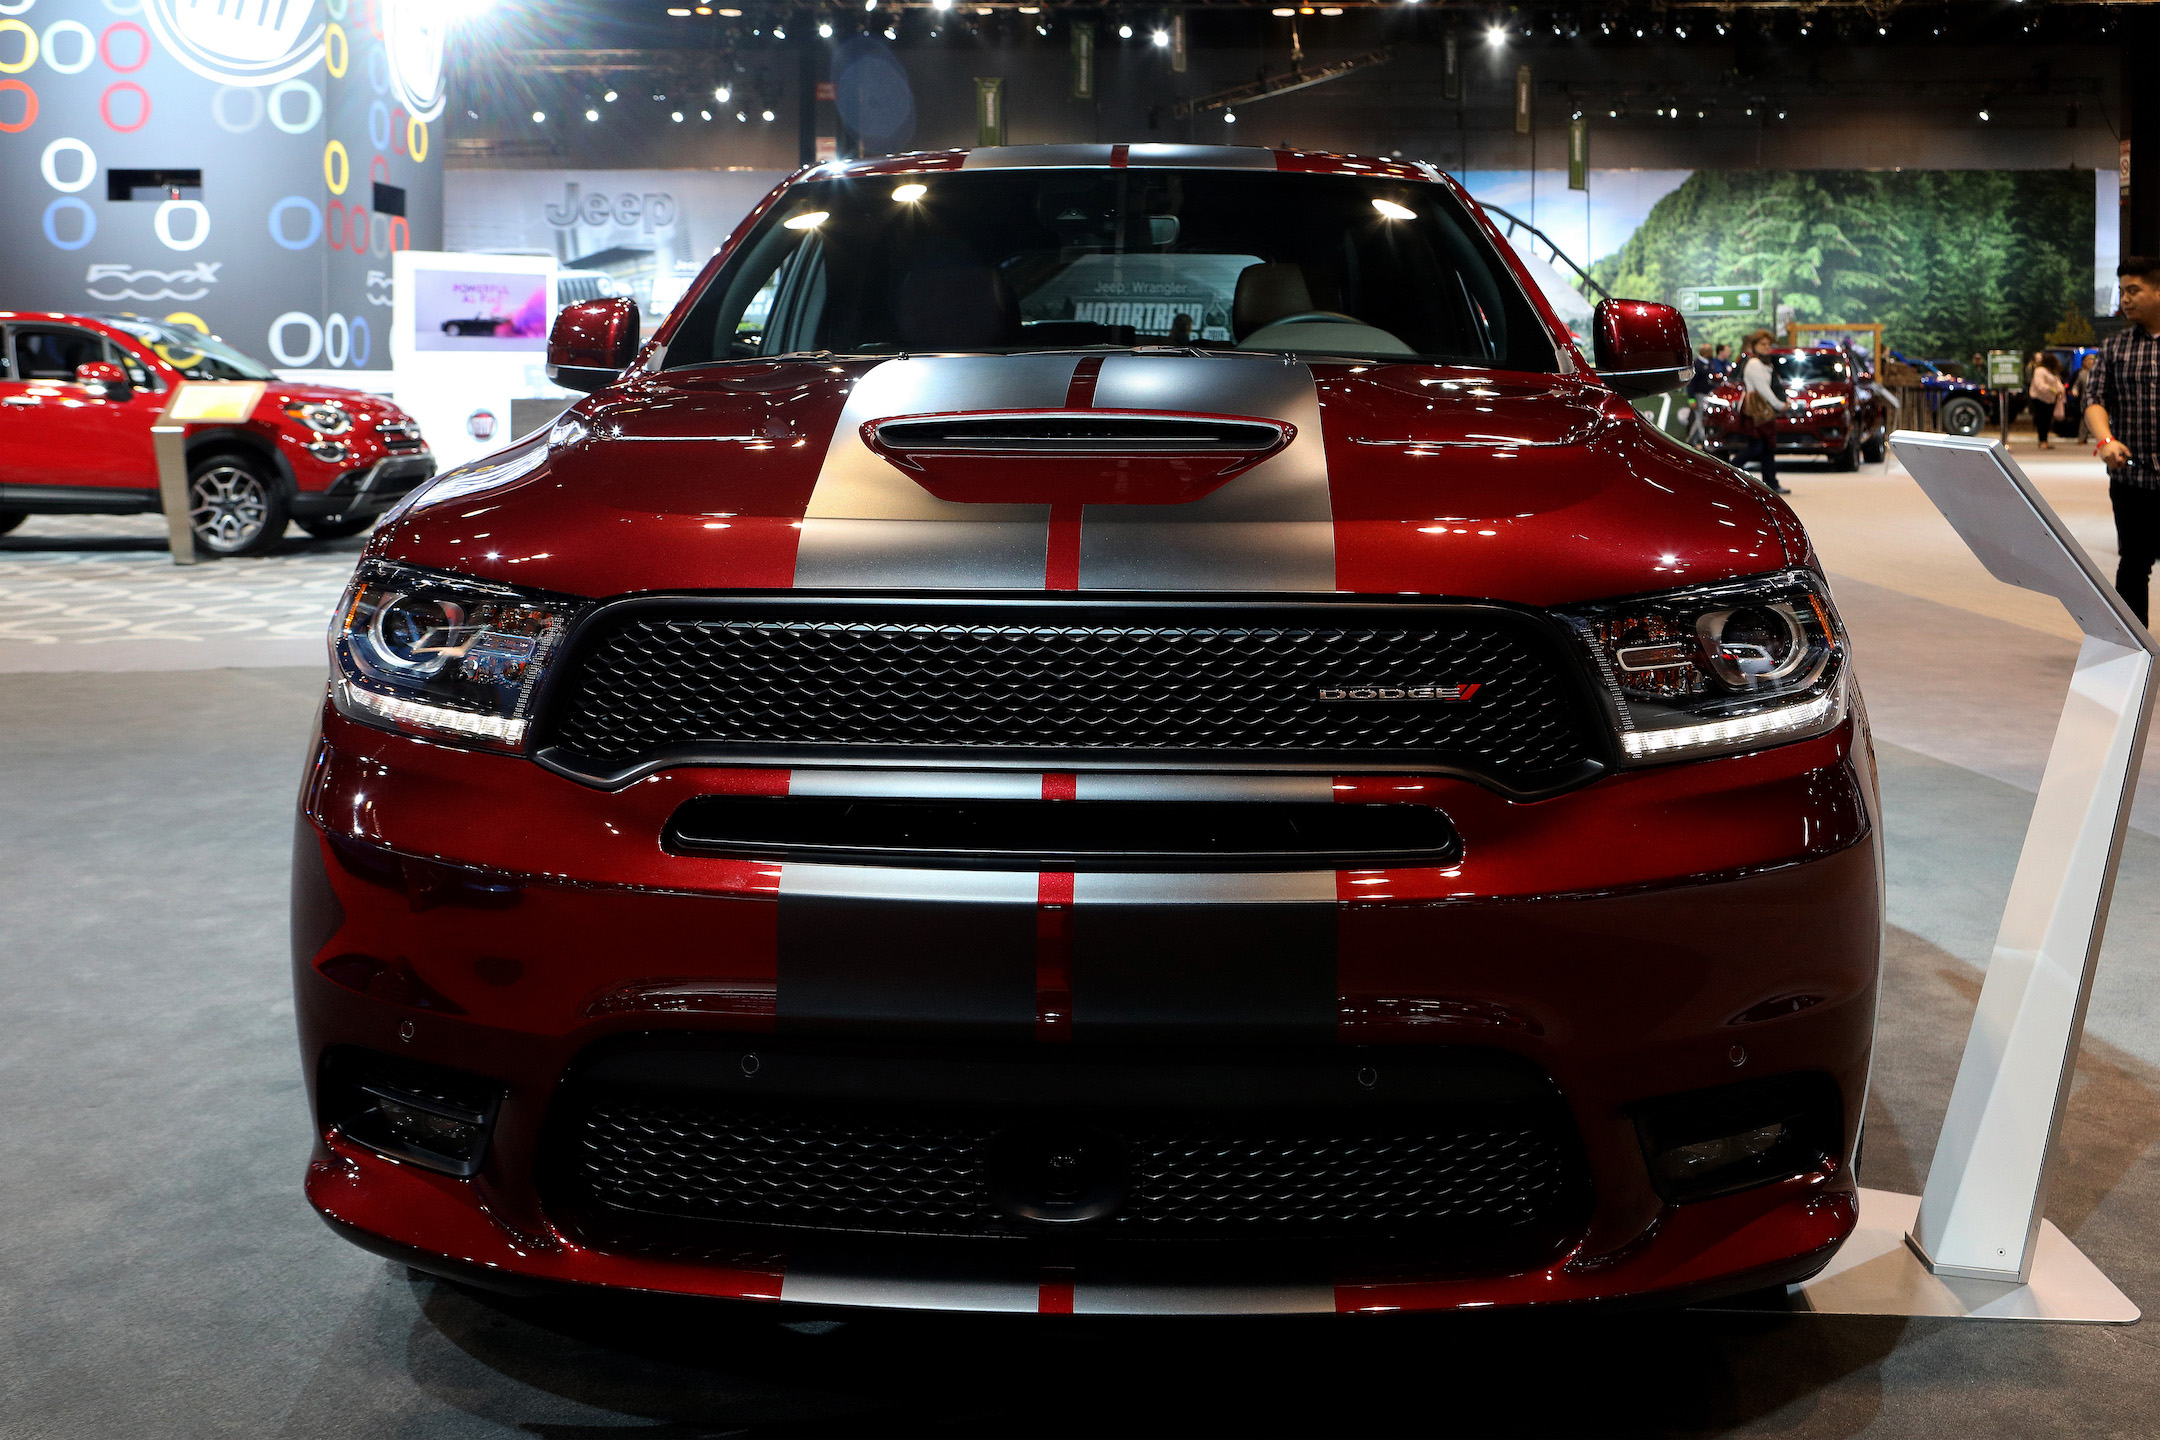 2019 Dodge Durango is on display at the 111th Annual Chicago Auto Show at McCormick Place